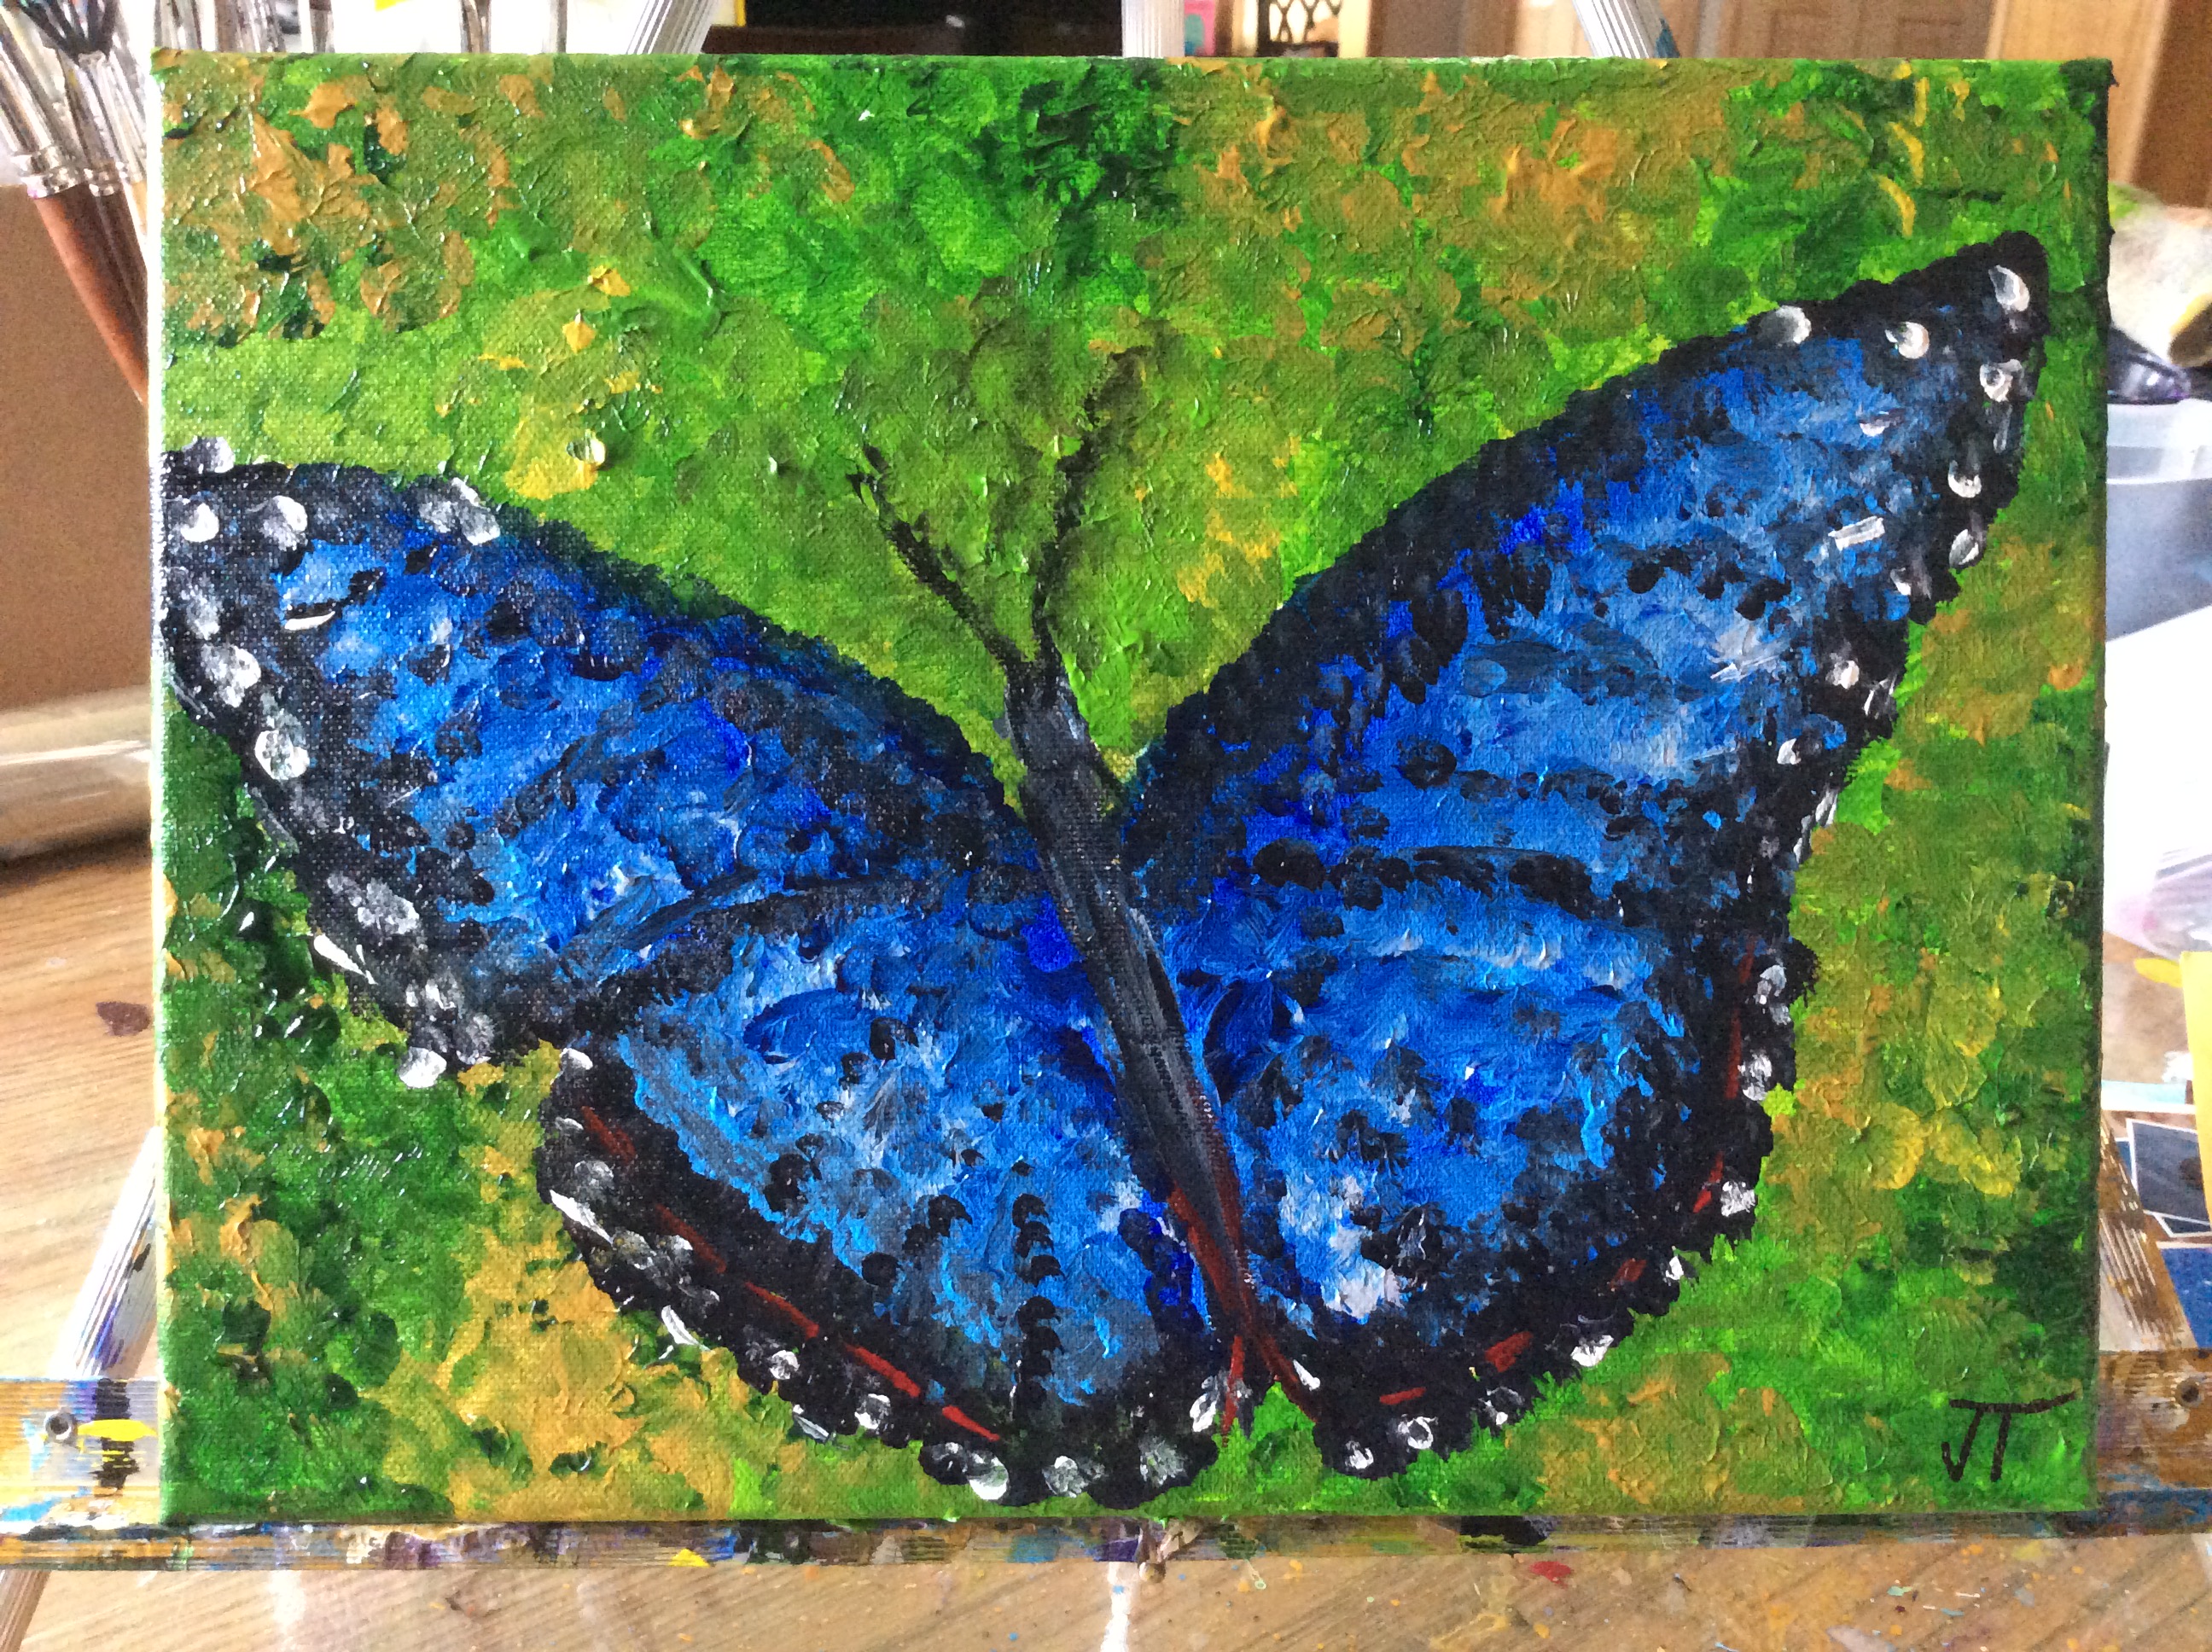 Blue and Black Butterfly